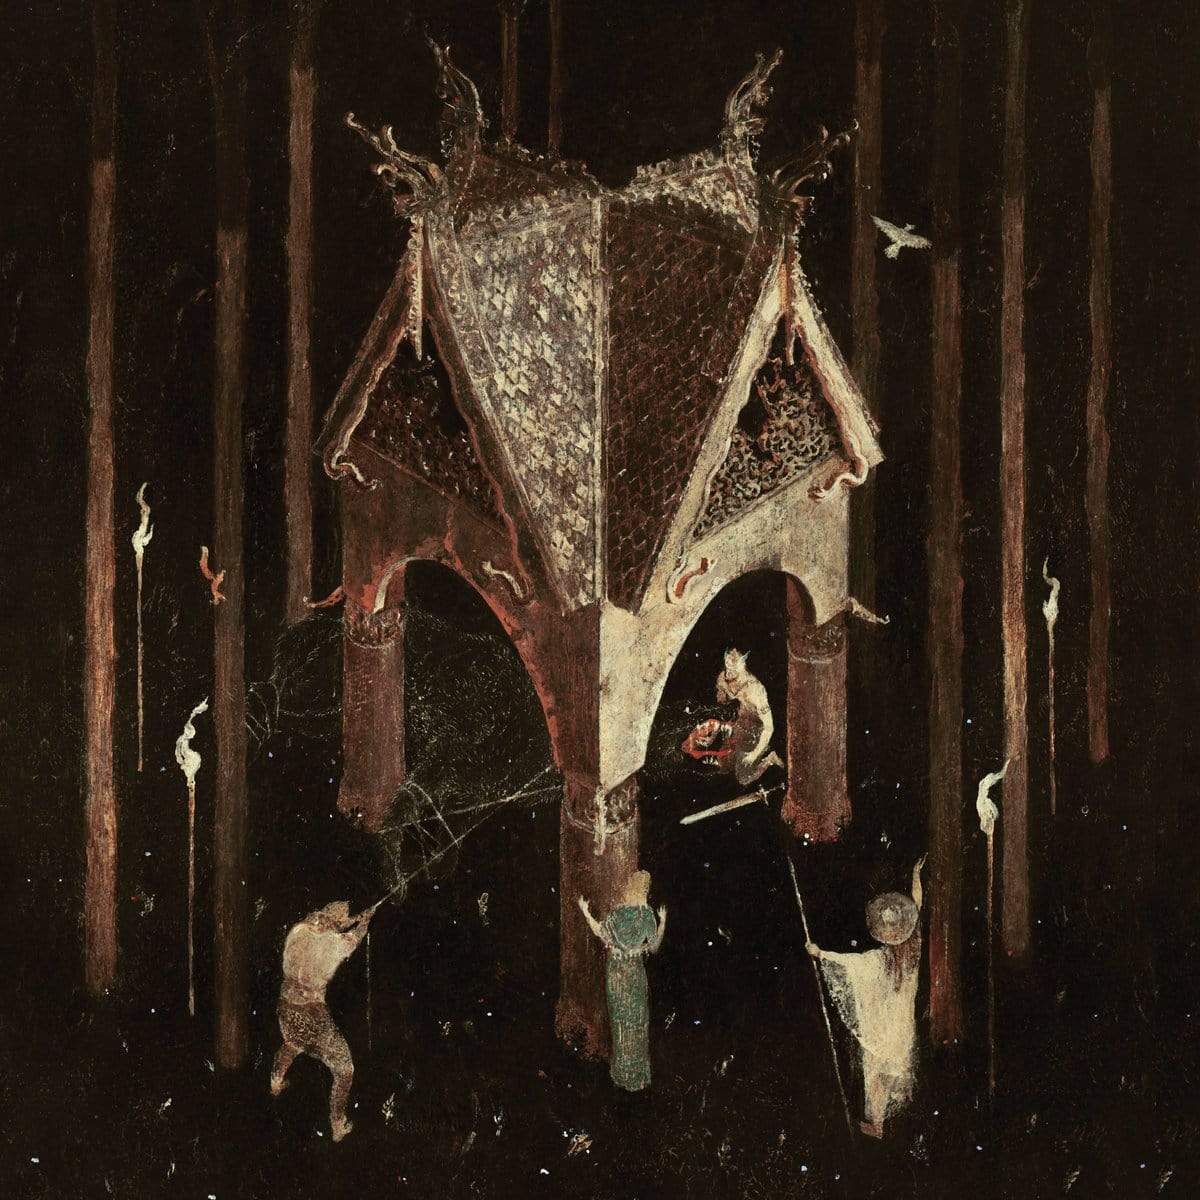 Artemisia Records CD Wolves in the Throne Room "Thrice Woven" CD